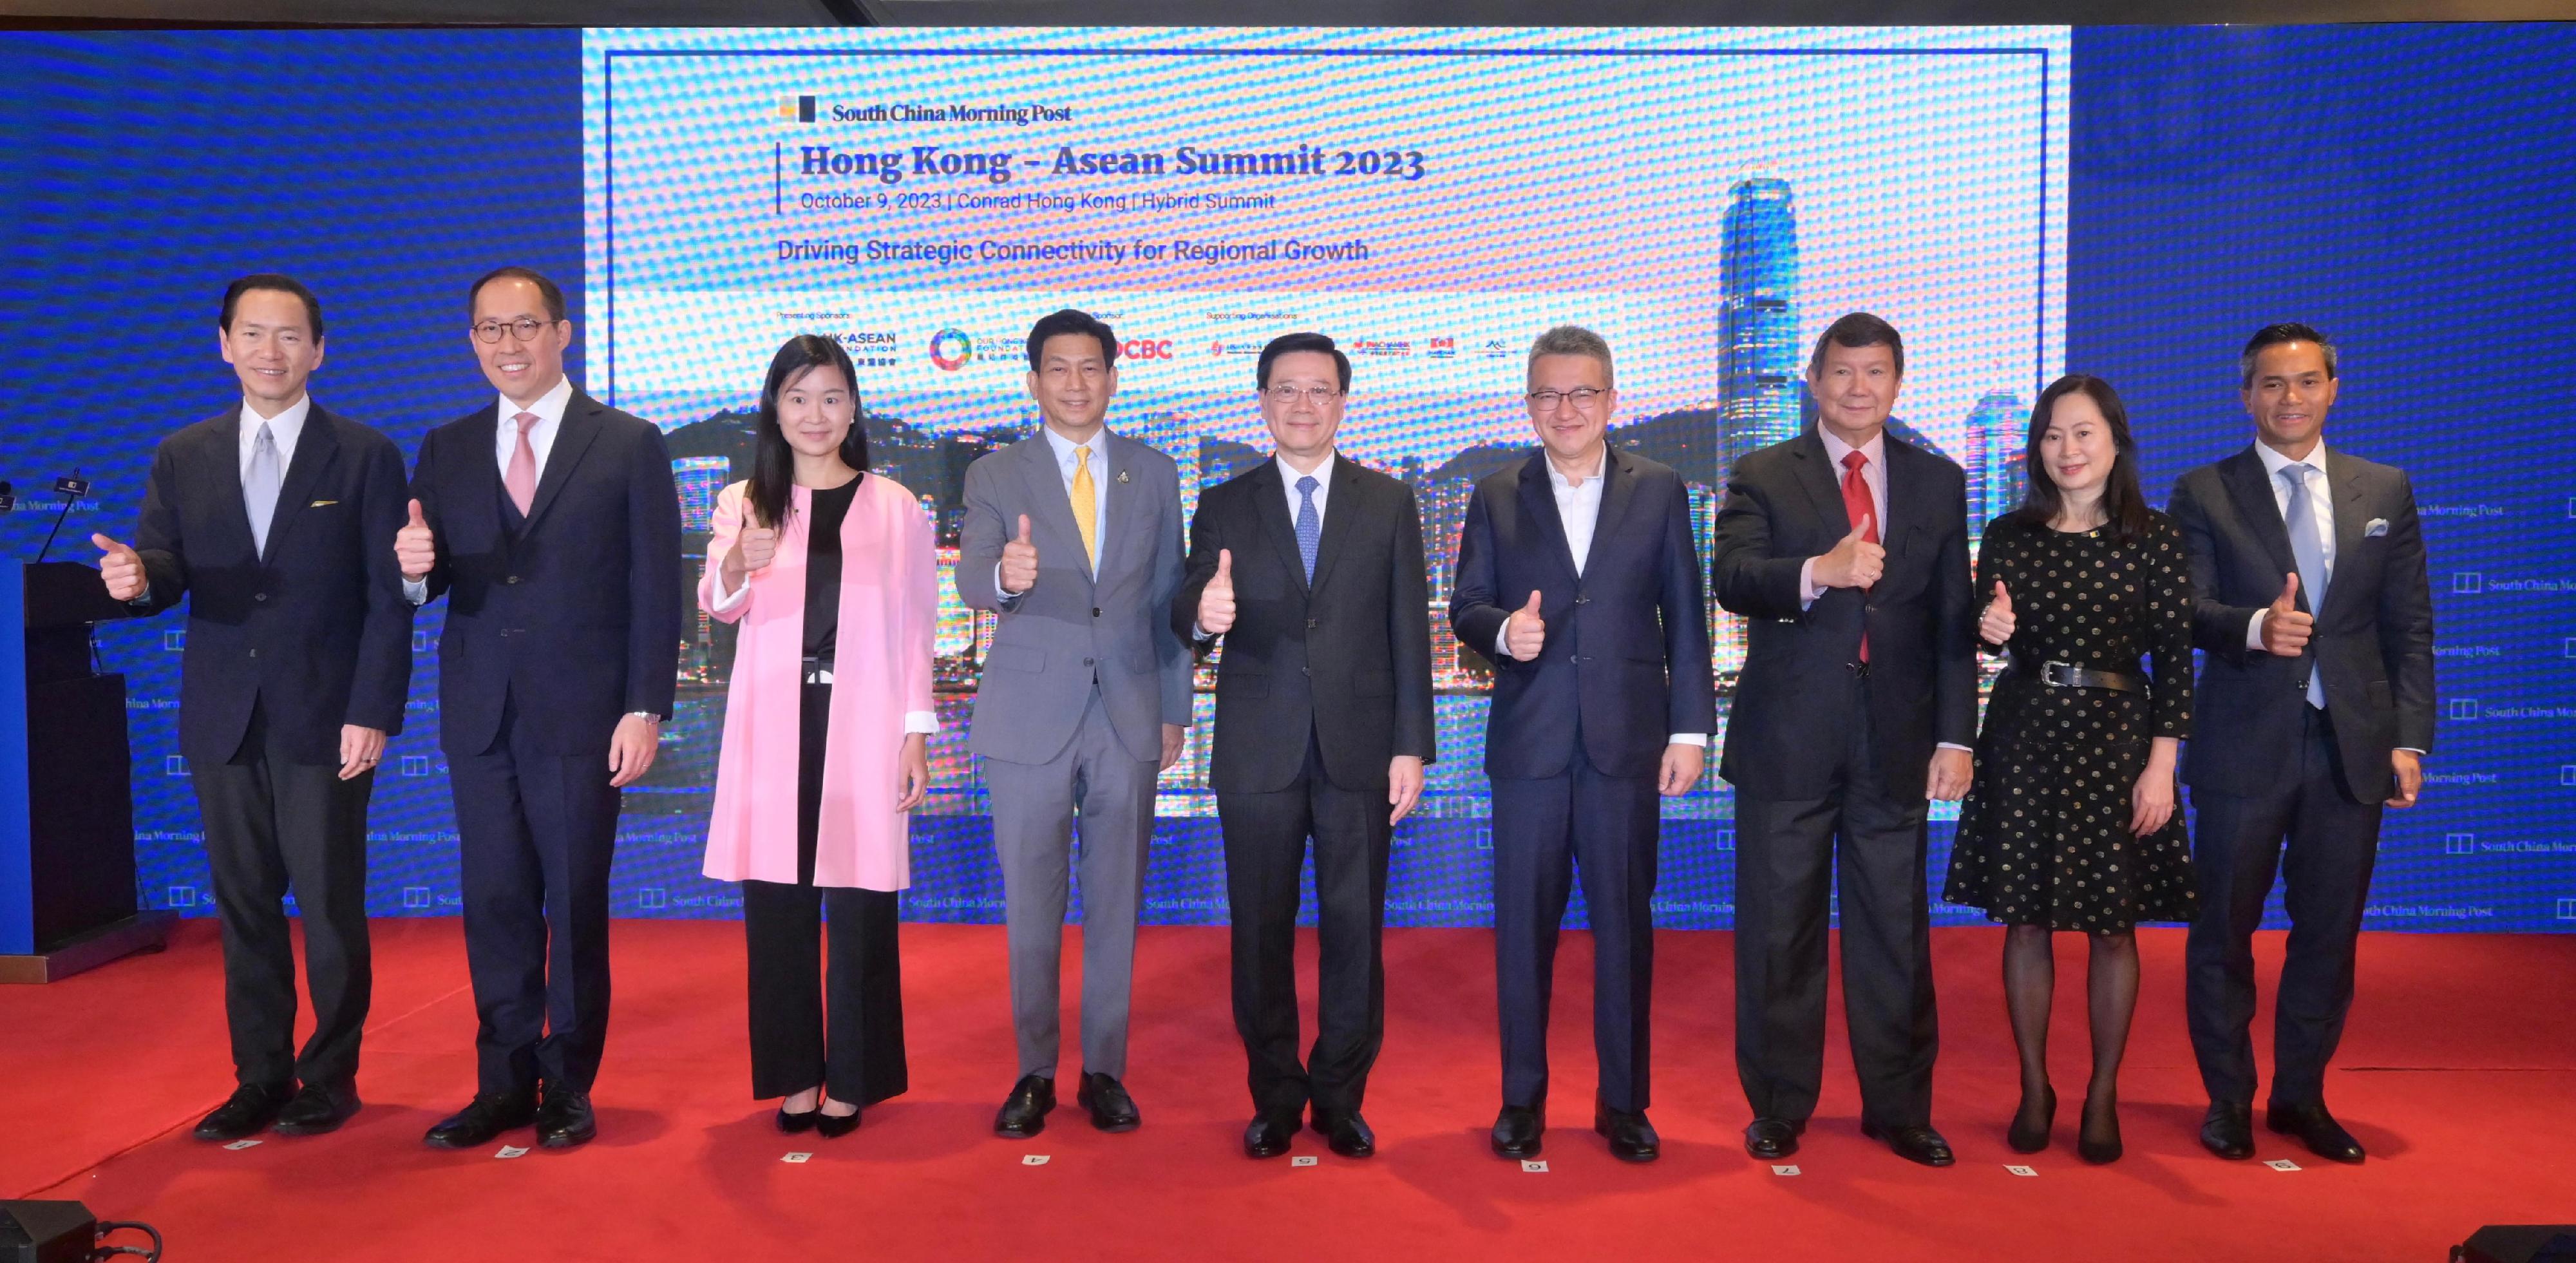 The Chief Executive, Mr John Lee, attended the Hong Kong-ASEAN Summit 2023 today (October 9). Photo shows Mr Lee (centre); Deputy Prime Minister of Thailand Mr Parnpree Bahiddha-nukara (fourth left); the Deputy Minister of Investment, Trade and Industry of Malaysia, Mr Liew Chin Tong (fourth right); the Chief Executive Officer of the South China Morning Post, Ms Catherine So (third left); the Chairman of the Hong Kong-ASEAN Foundation, Dr Daryl Ng (second left), and other guests at the summit.